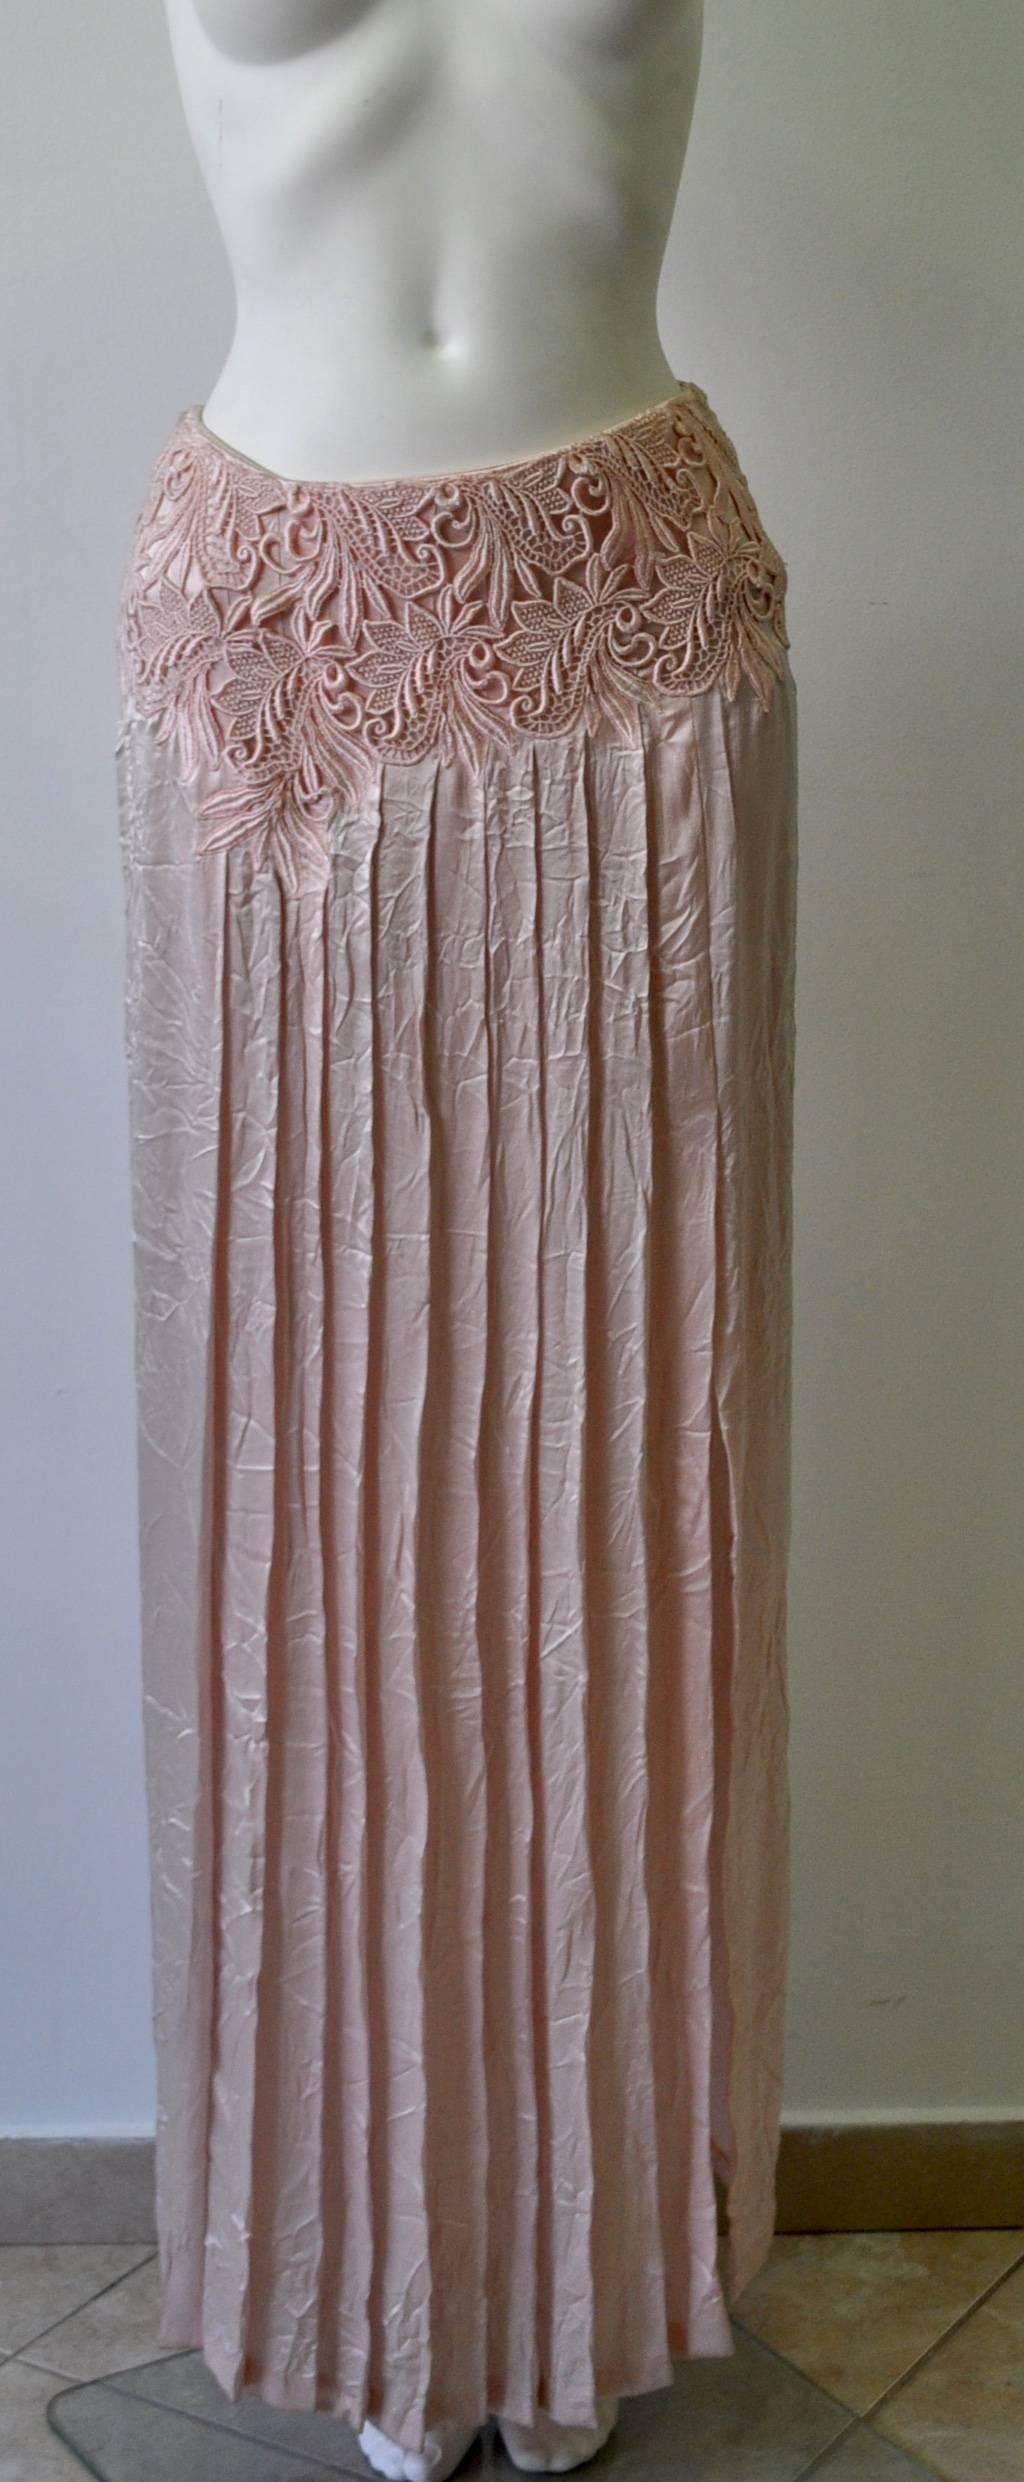 Rare Gianni Versace Couture Silk "Wrinkle Chic" Maxi Skirt Featuring Lace Overlay Waistband with High Side Slits, Notorious Spring 1994 Punk Collection